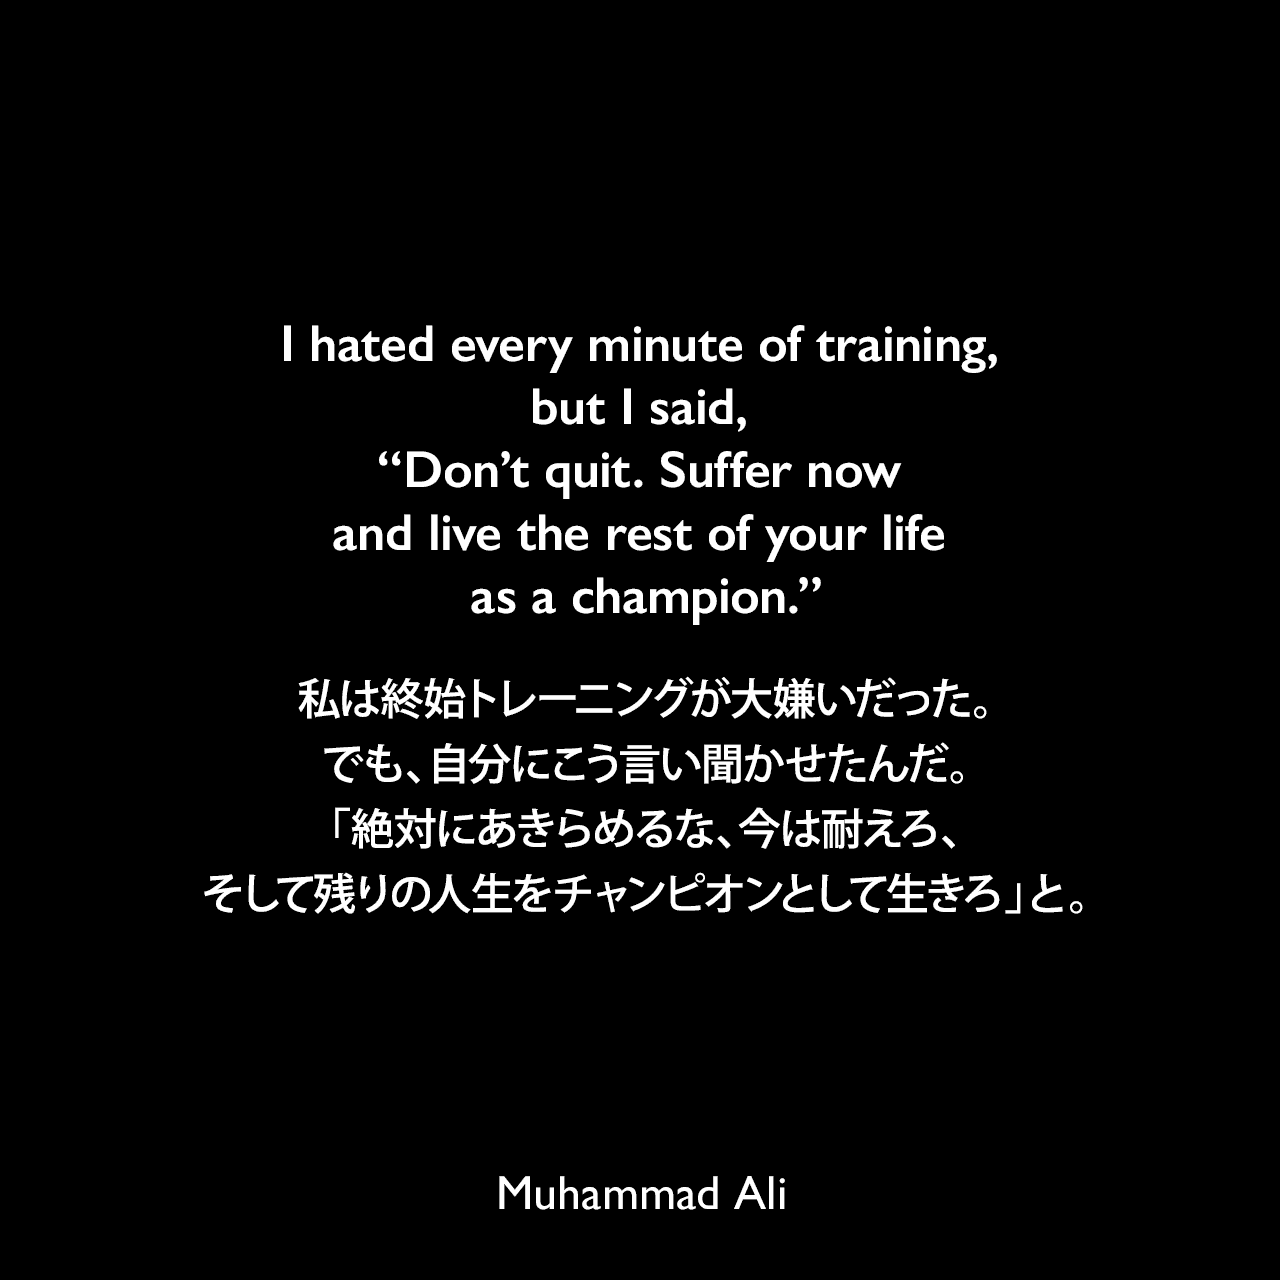 I hated every minute of training, but I said, “Don’t quit. Suffer now and live the rest of your life as a champion.”私は終始トレーニングが大嫌いだった。でも、自分にこう言い聞かせたんだ。「絶対にあきらめるな、今は耐えろ、そして残りの人生をチャンピオンとして生きろ」と。Muhammad Ali